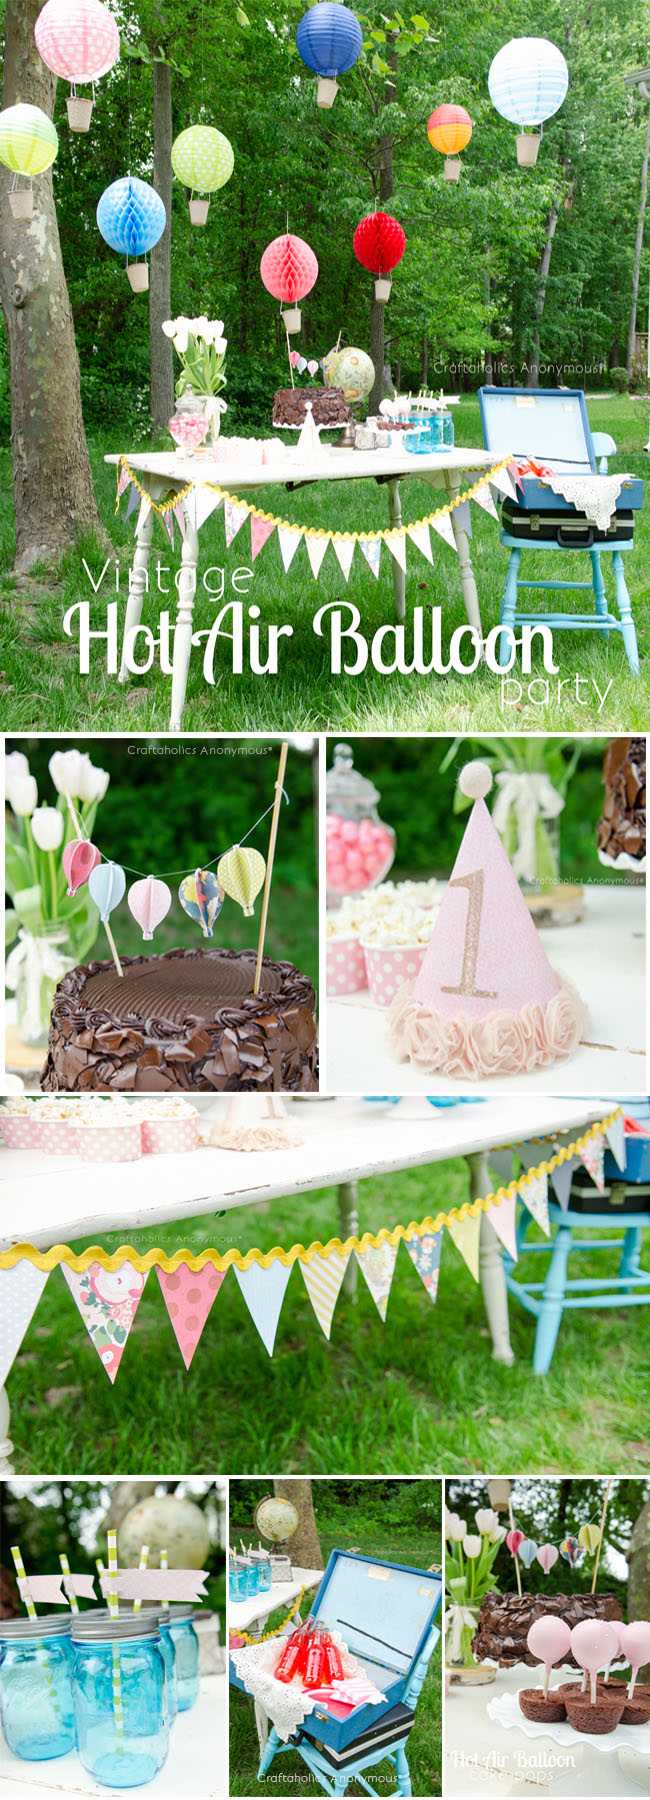 Vintage Hot Air Balloon Birthday Party. Such an amazing party! Love this hot air balloons, the bunting, and the hot air balloon cake pops.